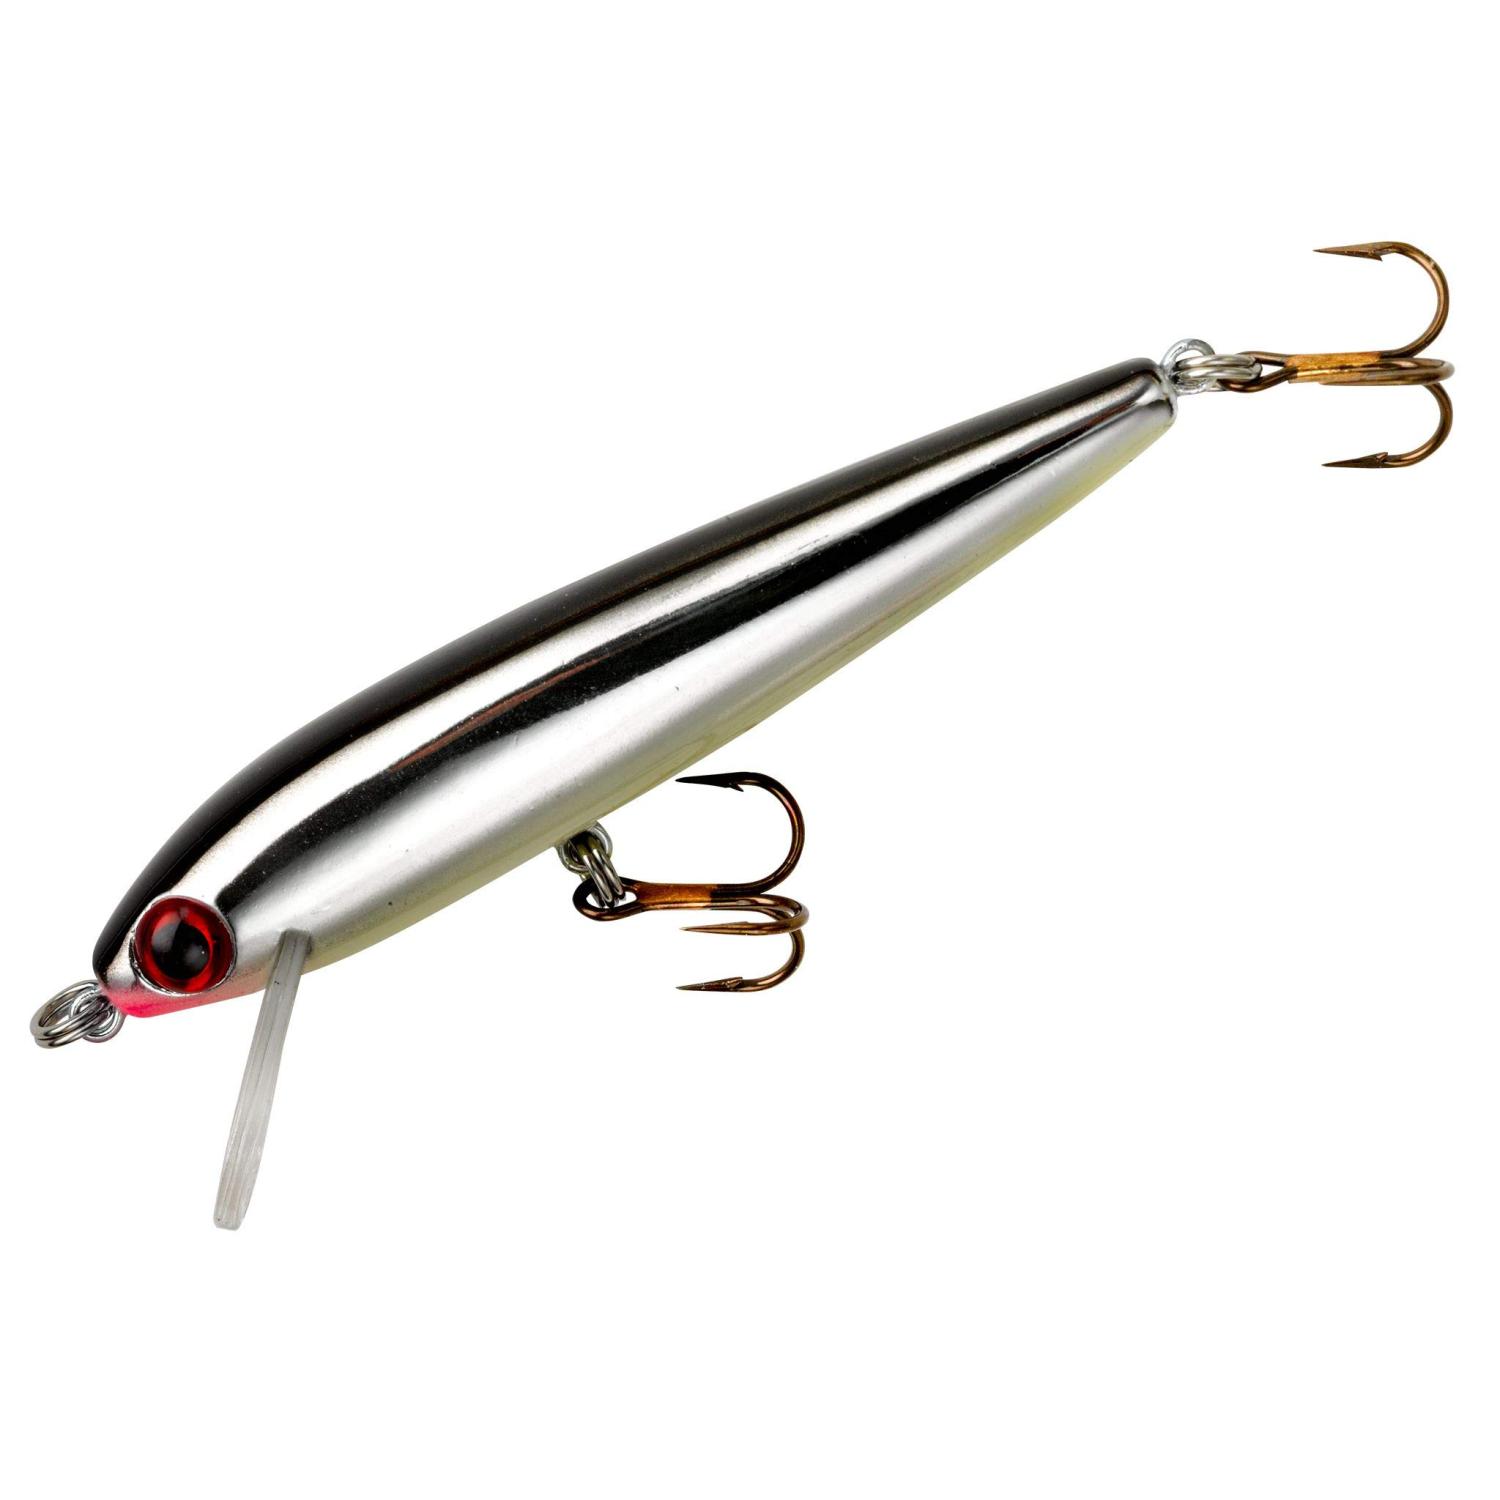 Rebel Lures Value Series Minnow Crankbait Shallow Water Fishing Lure 1 5/8  in, 5/64